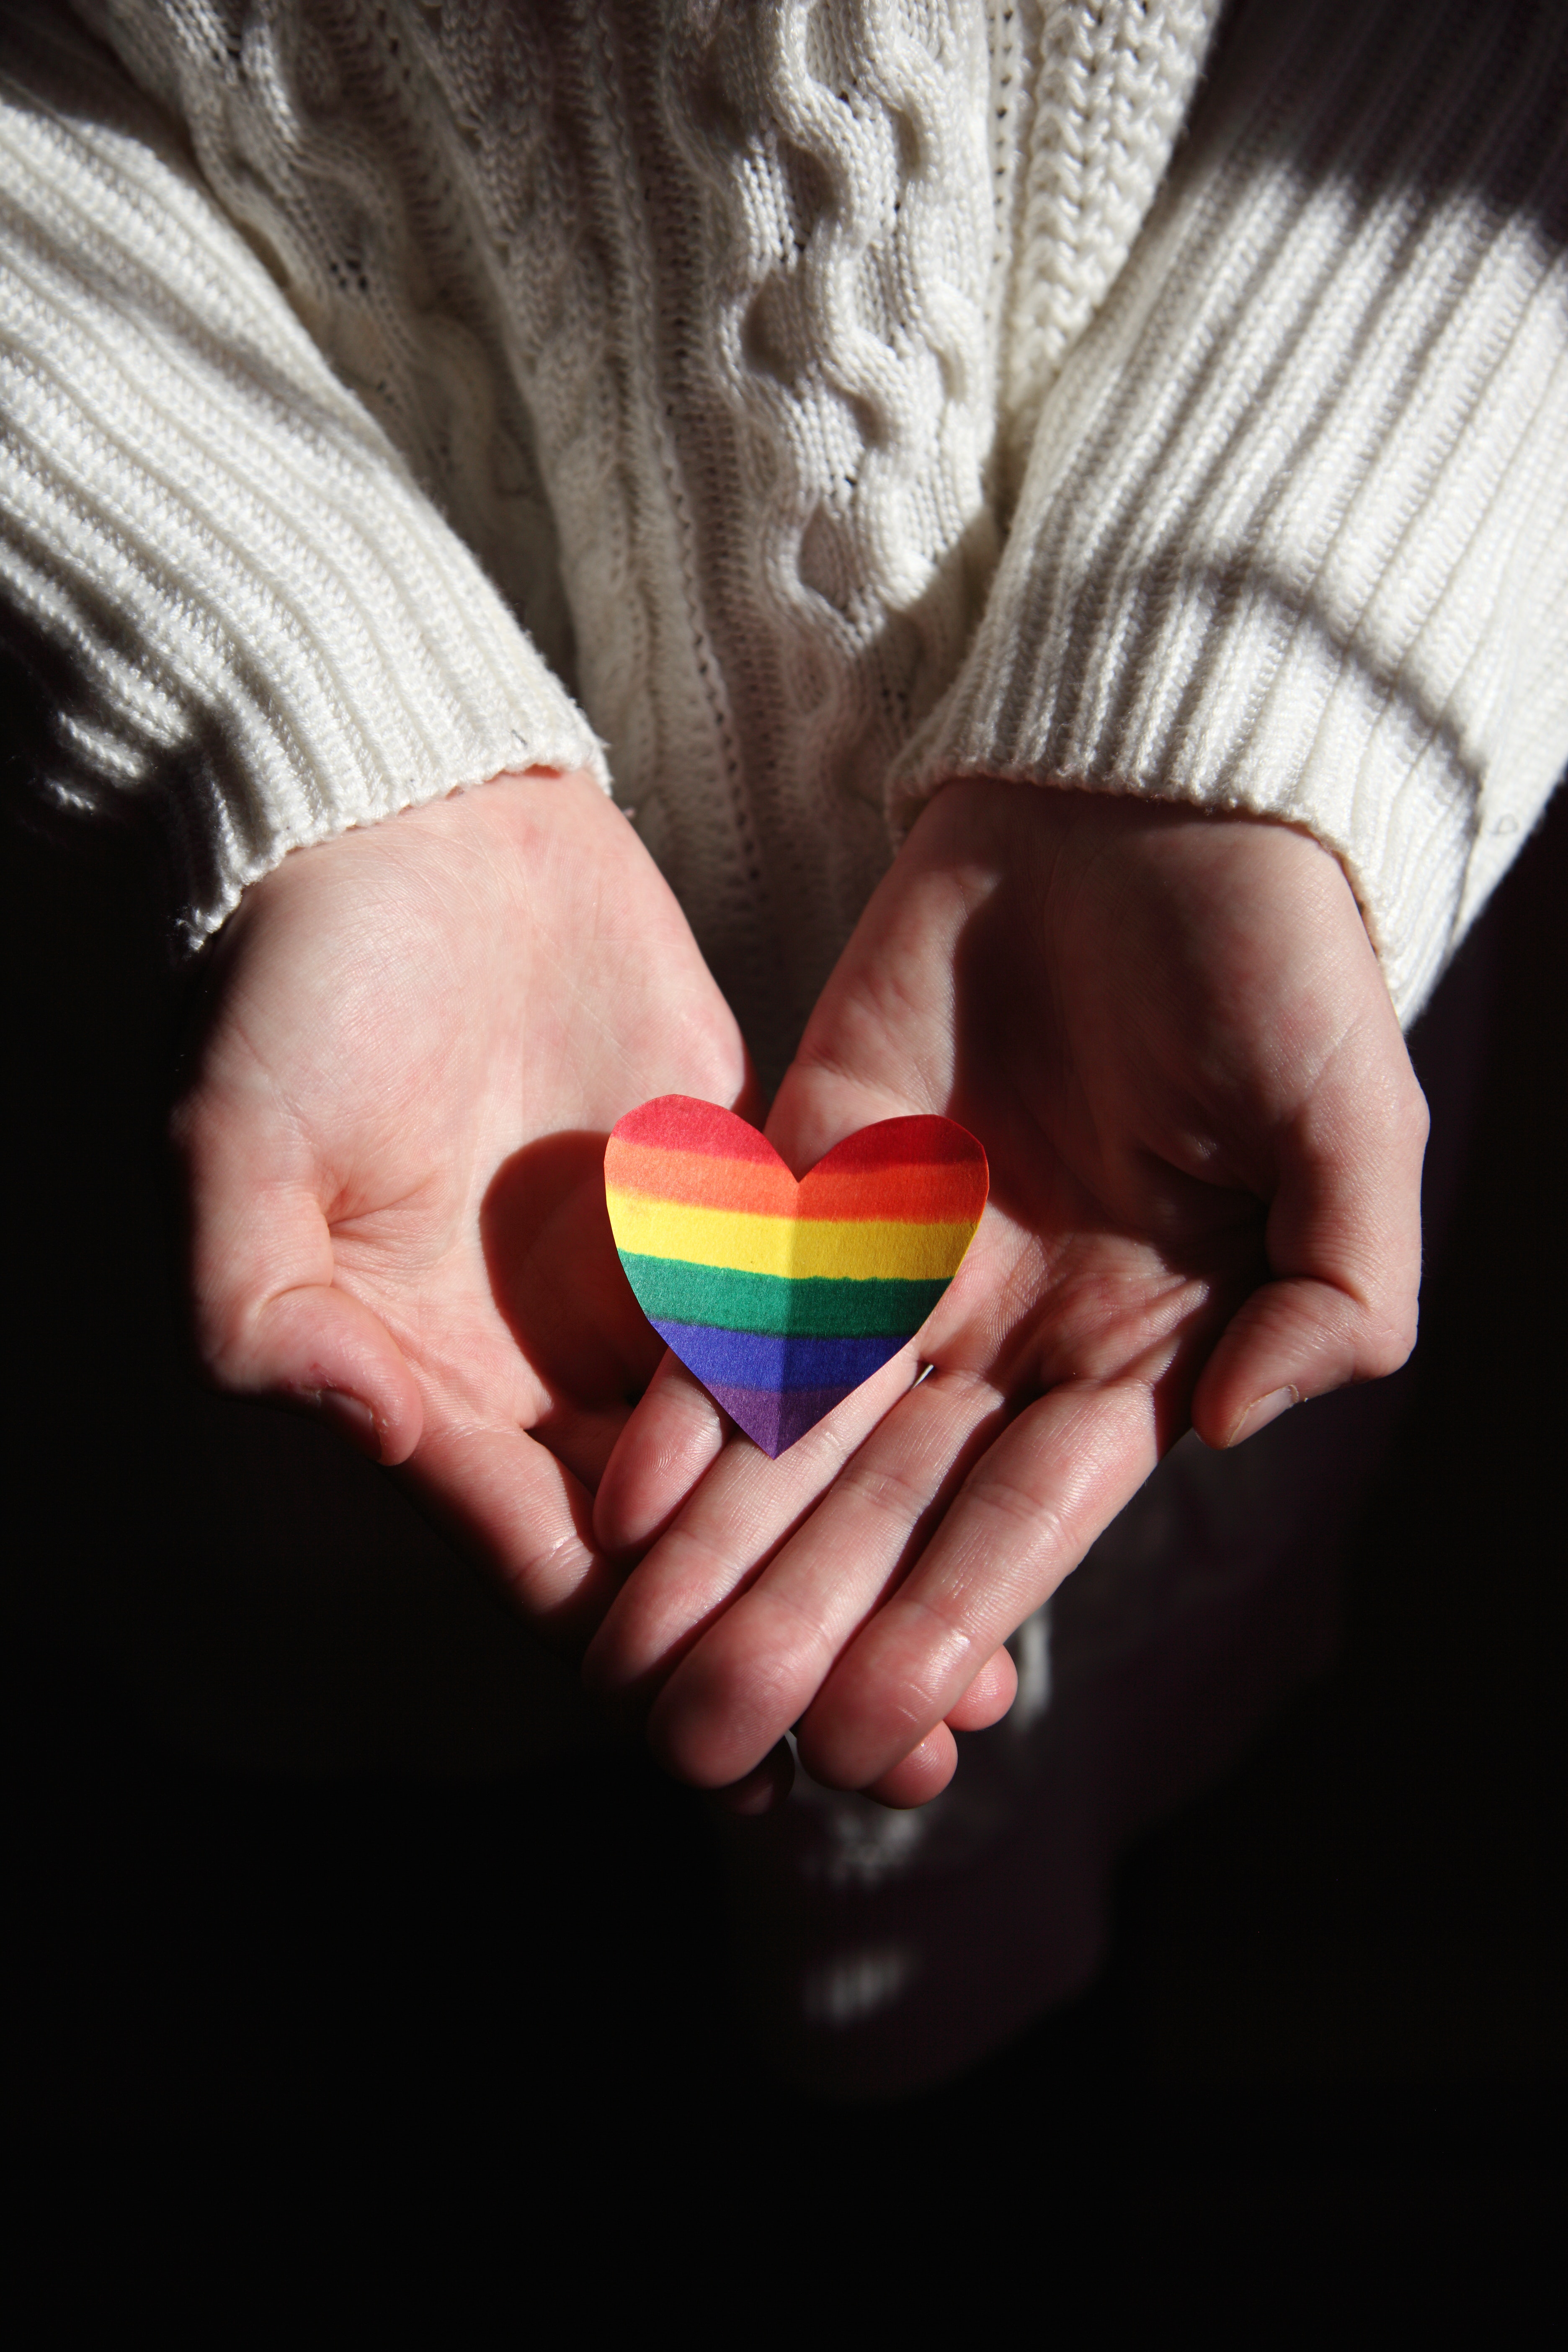 An individual cupping a cut out heart with the Pride colors on it. │ Source: Unsplash